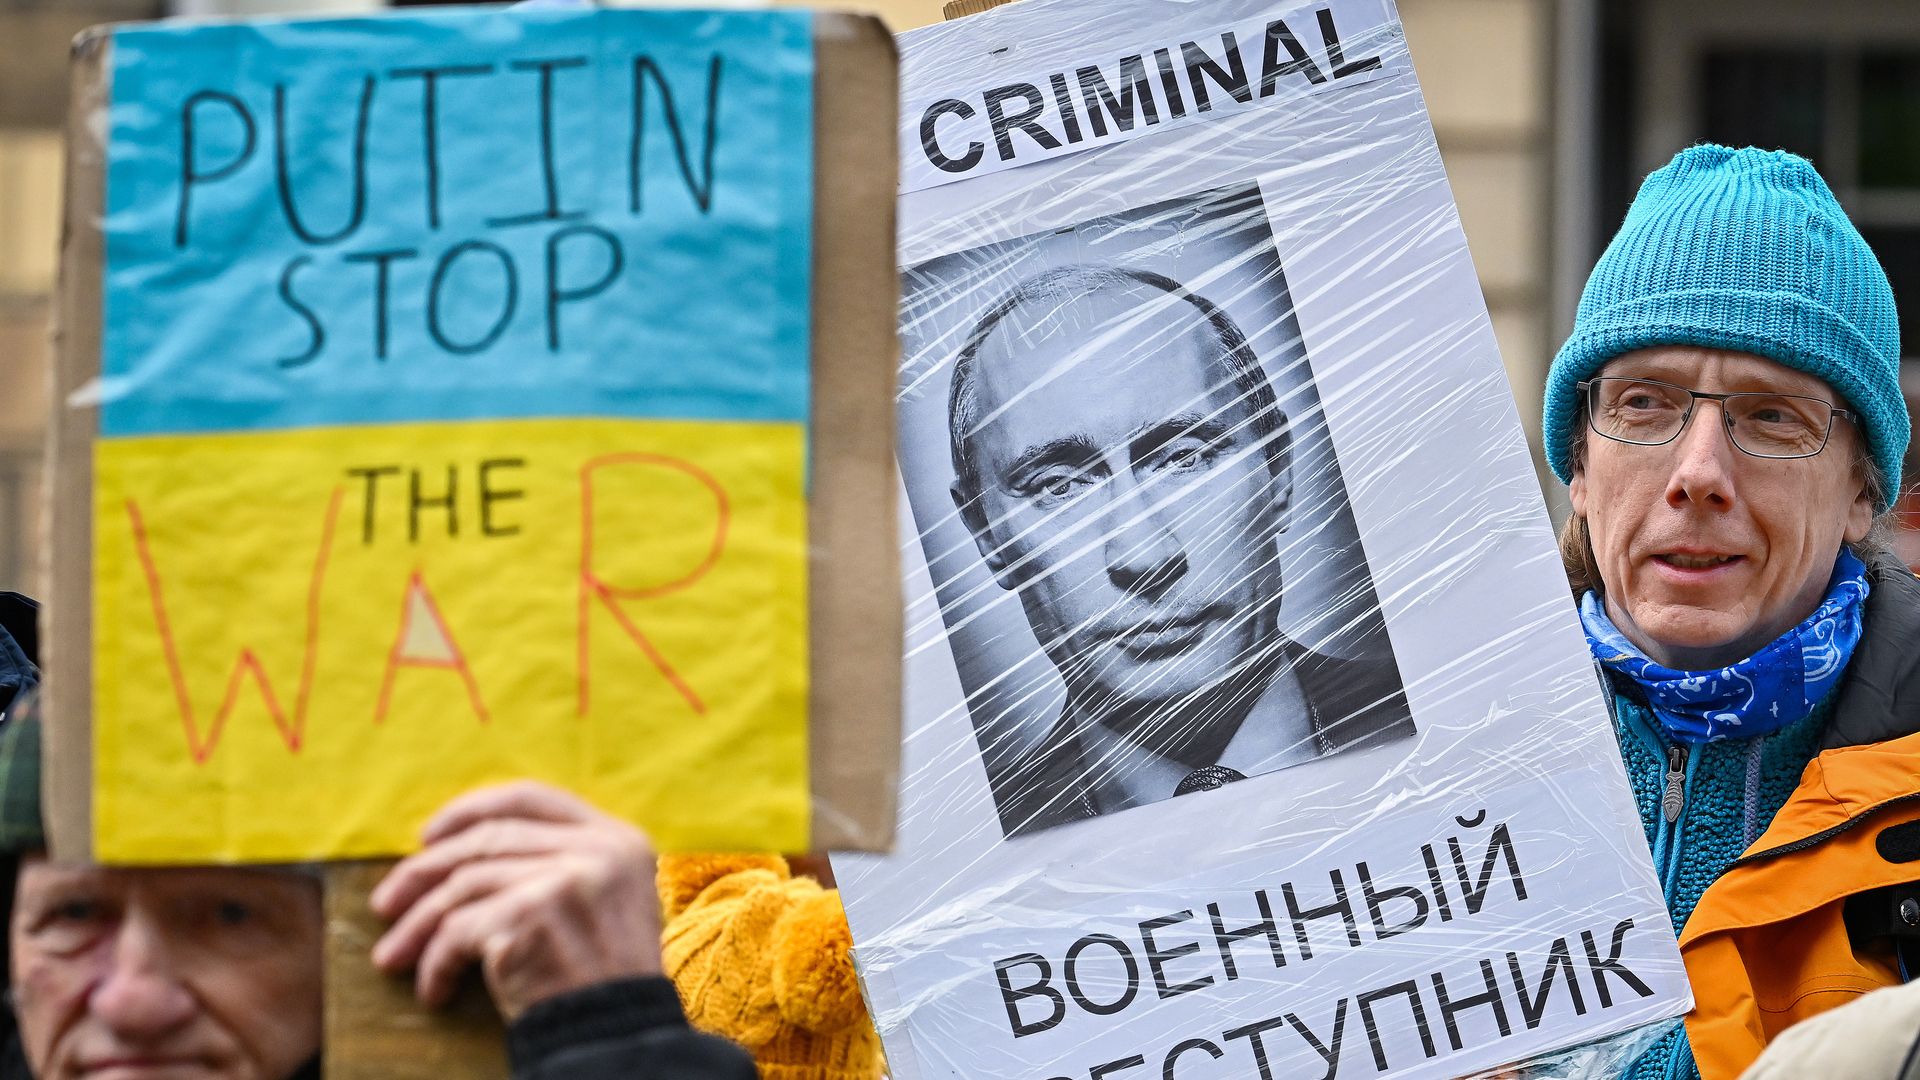 People protest Putin and the war in Ukraine.